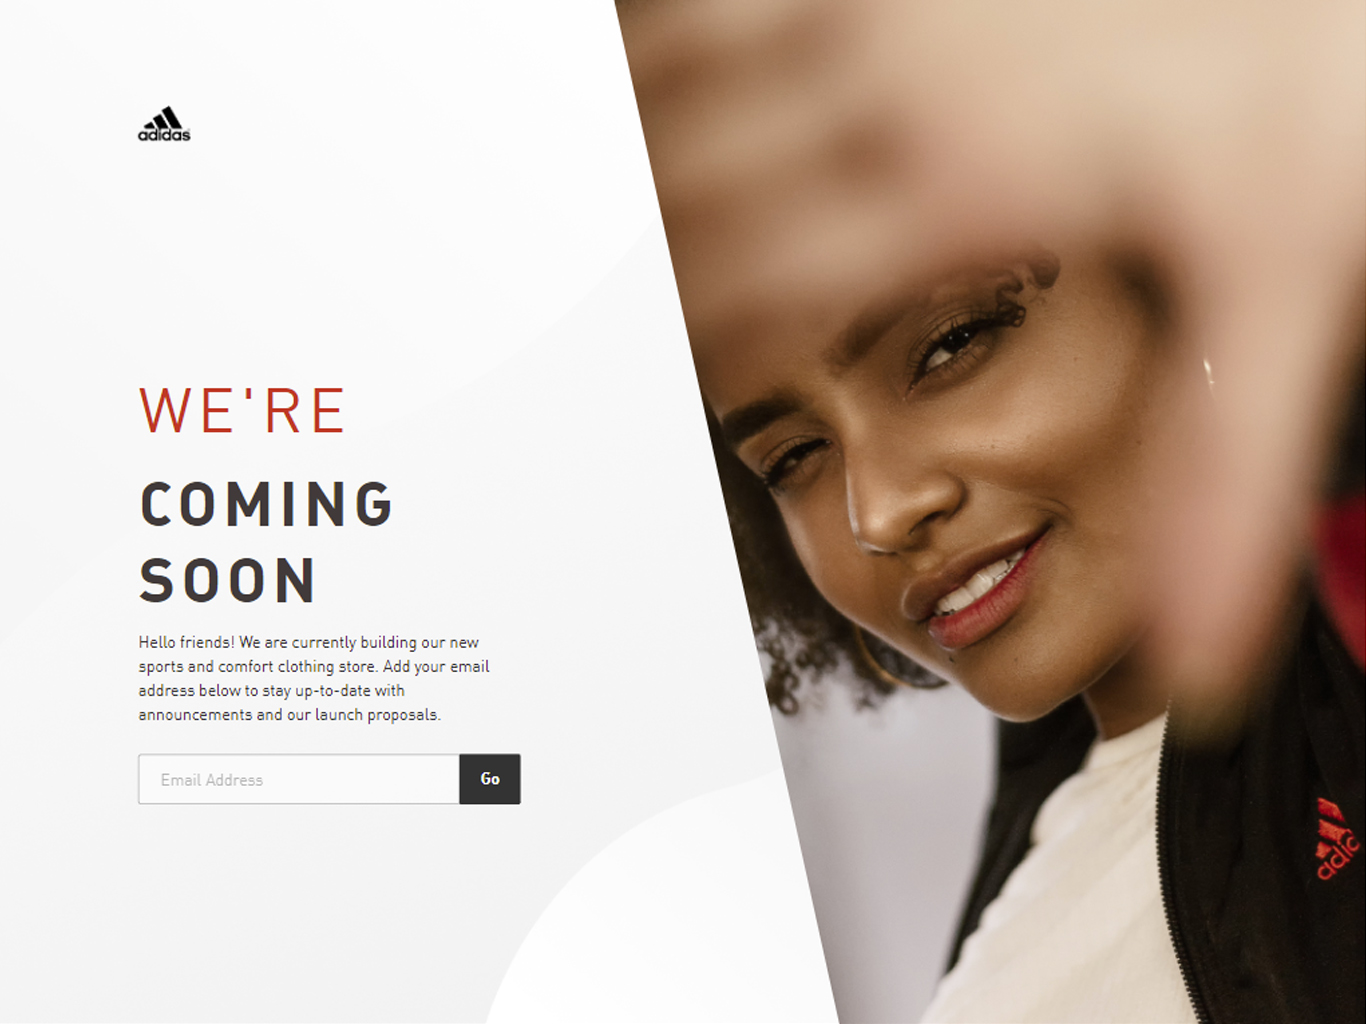 A webpage display for an upcoming Adidas store; there is a woman in an Adidas jacket holding her hand out and smiling.